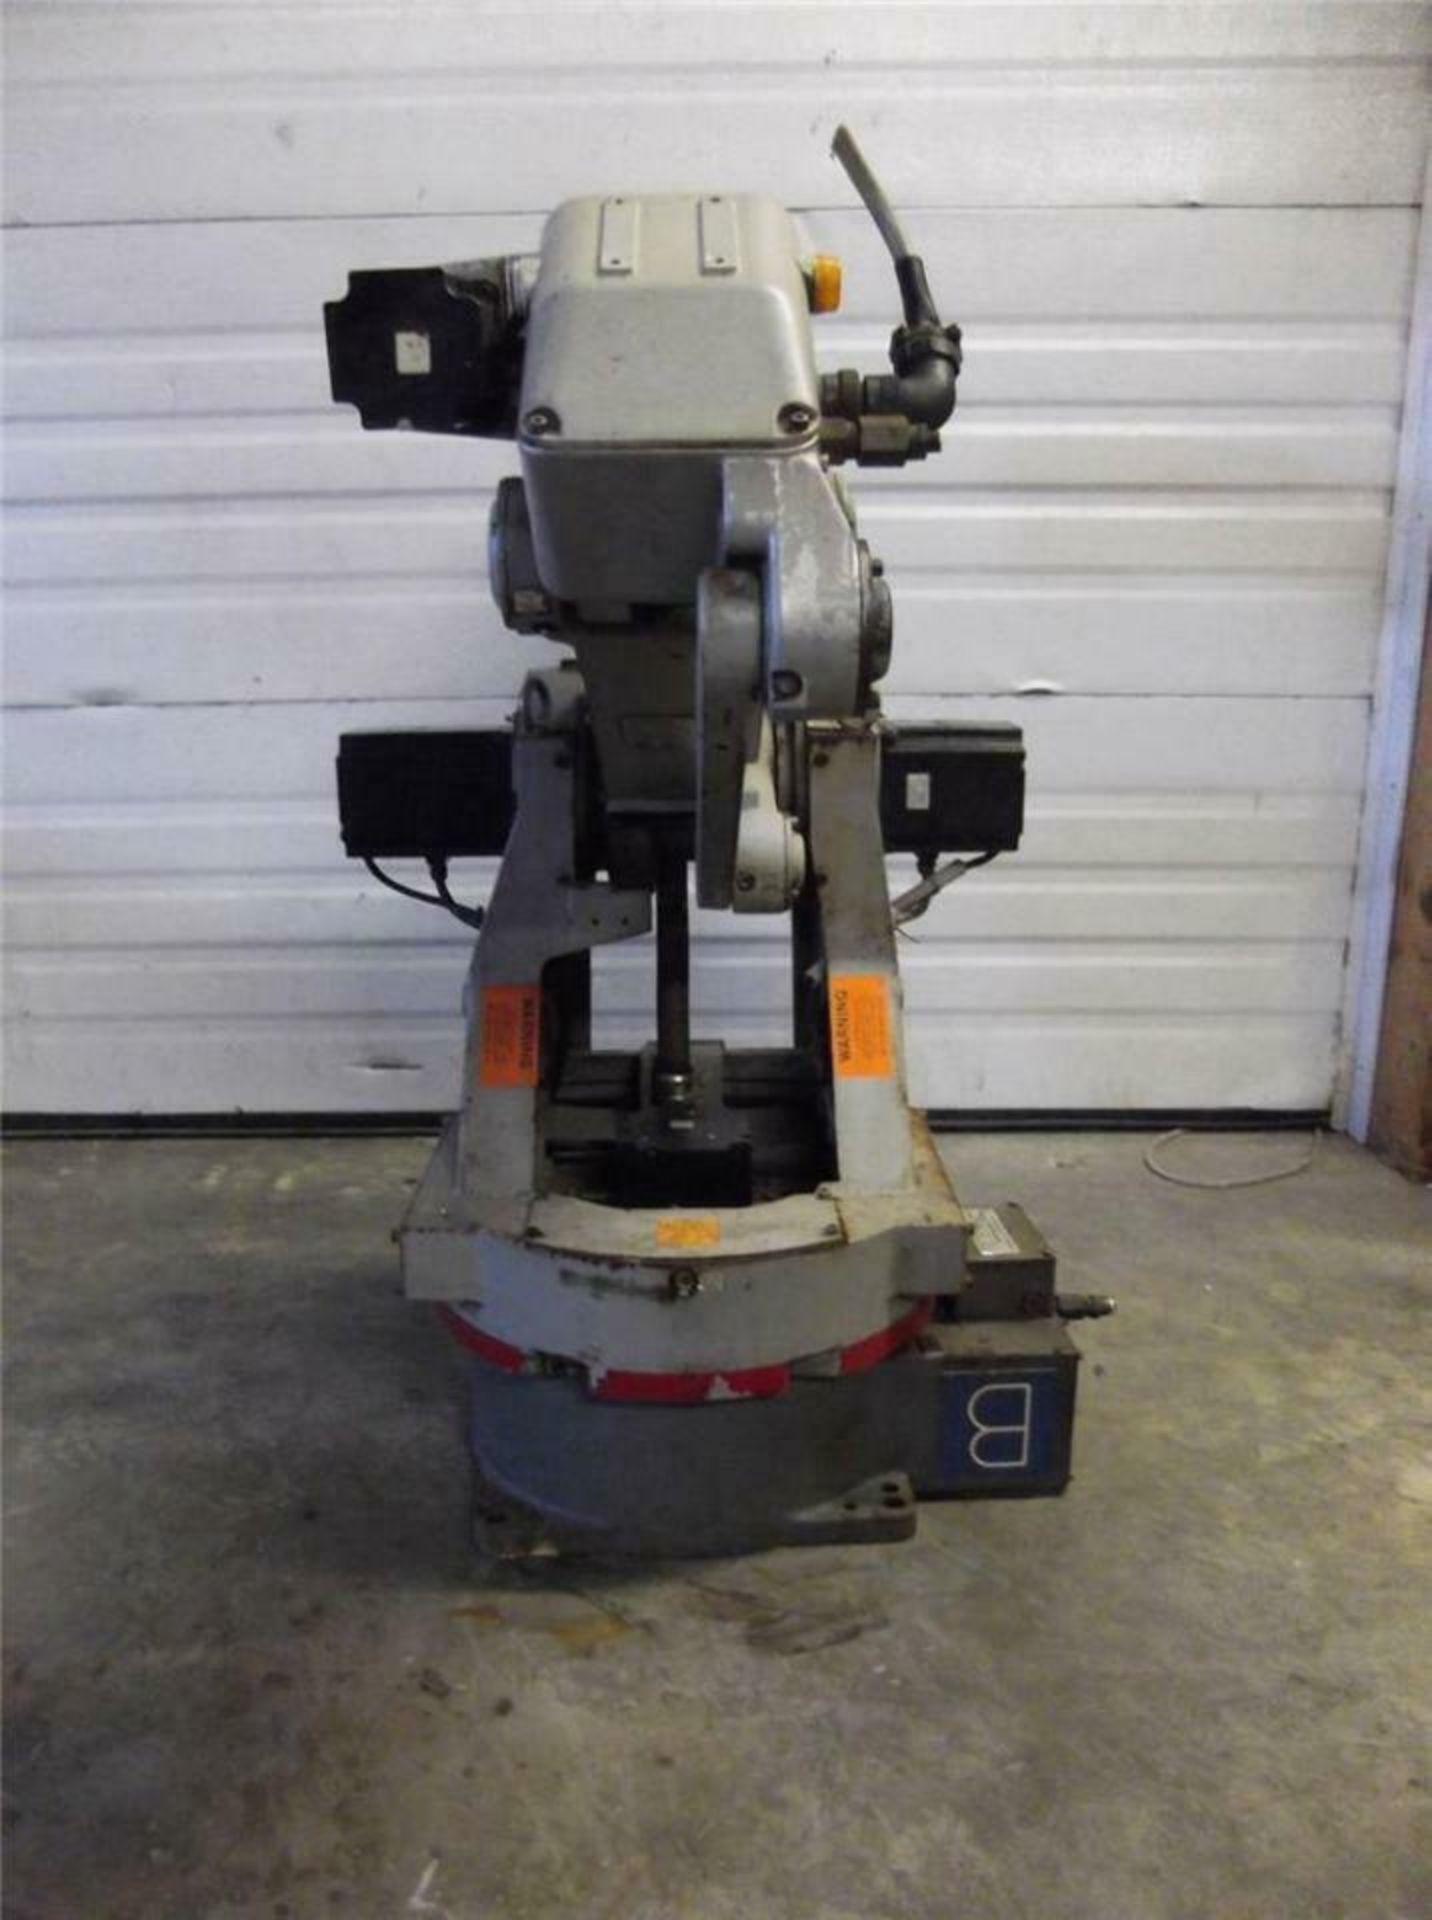 Motoman SK16 Robot, 6 Axis, 16 KG Payload, 1,555 mm Reach - Image 6 of 7